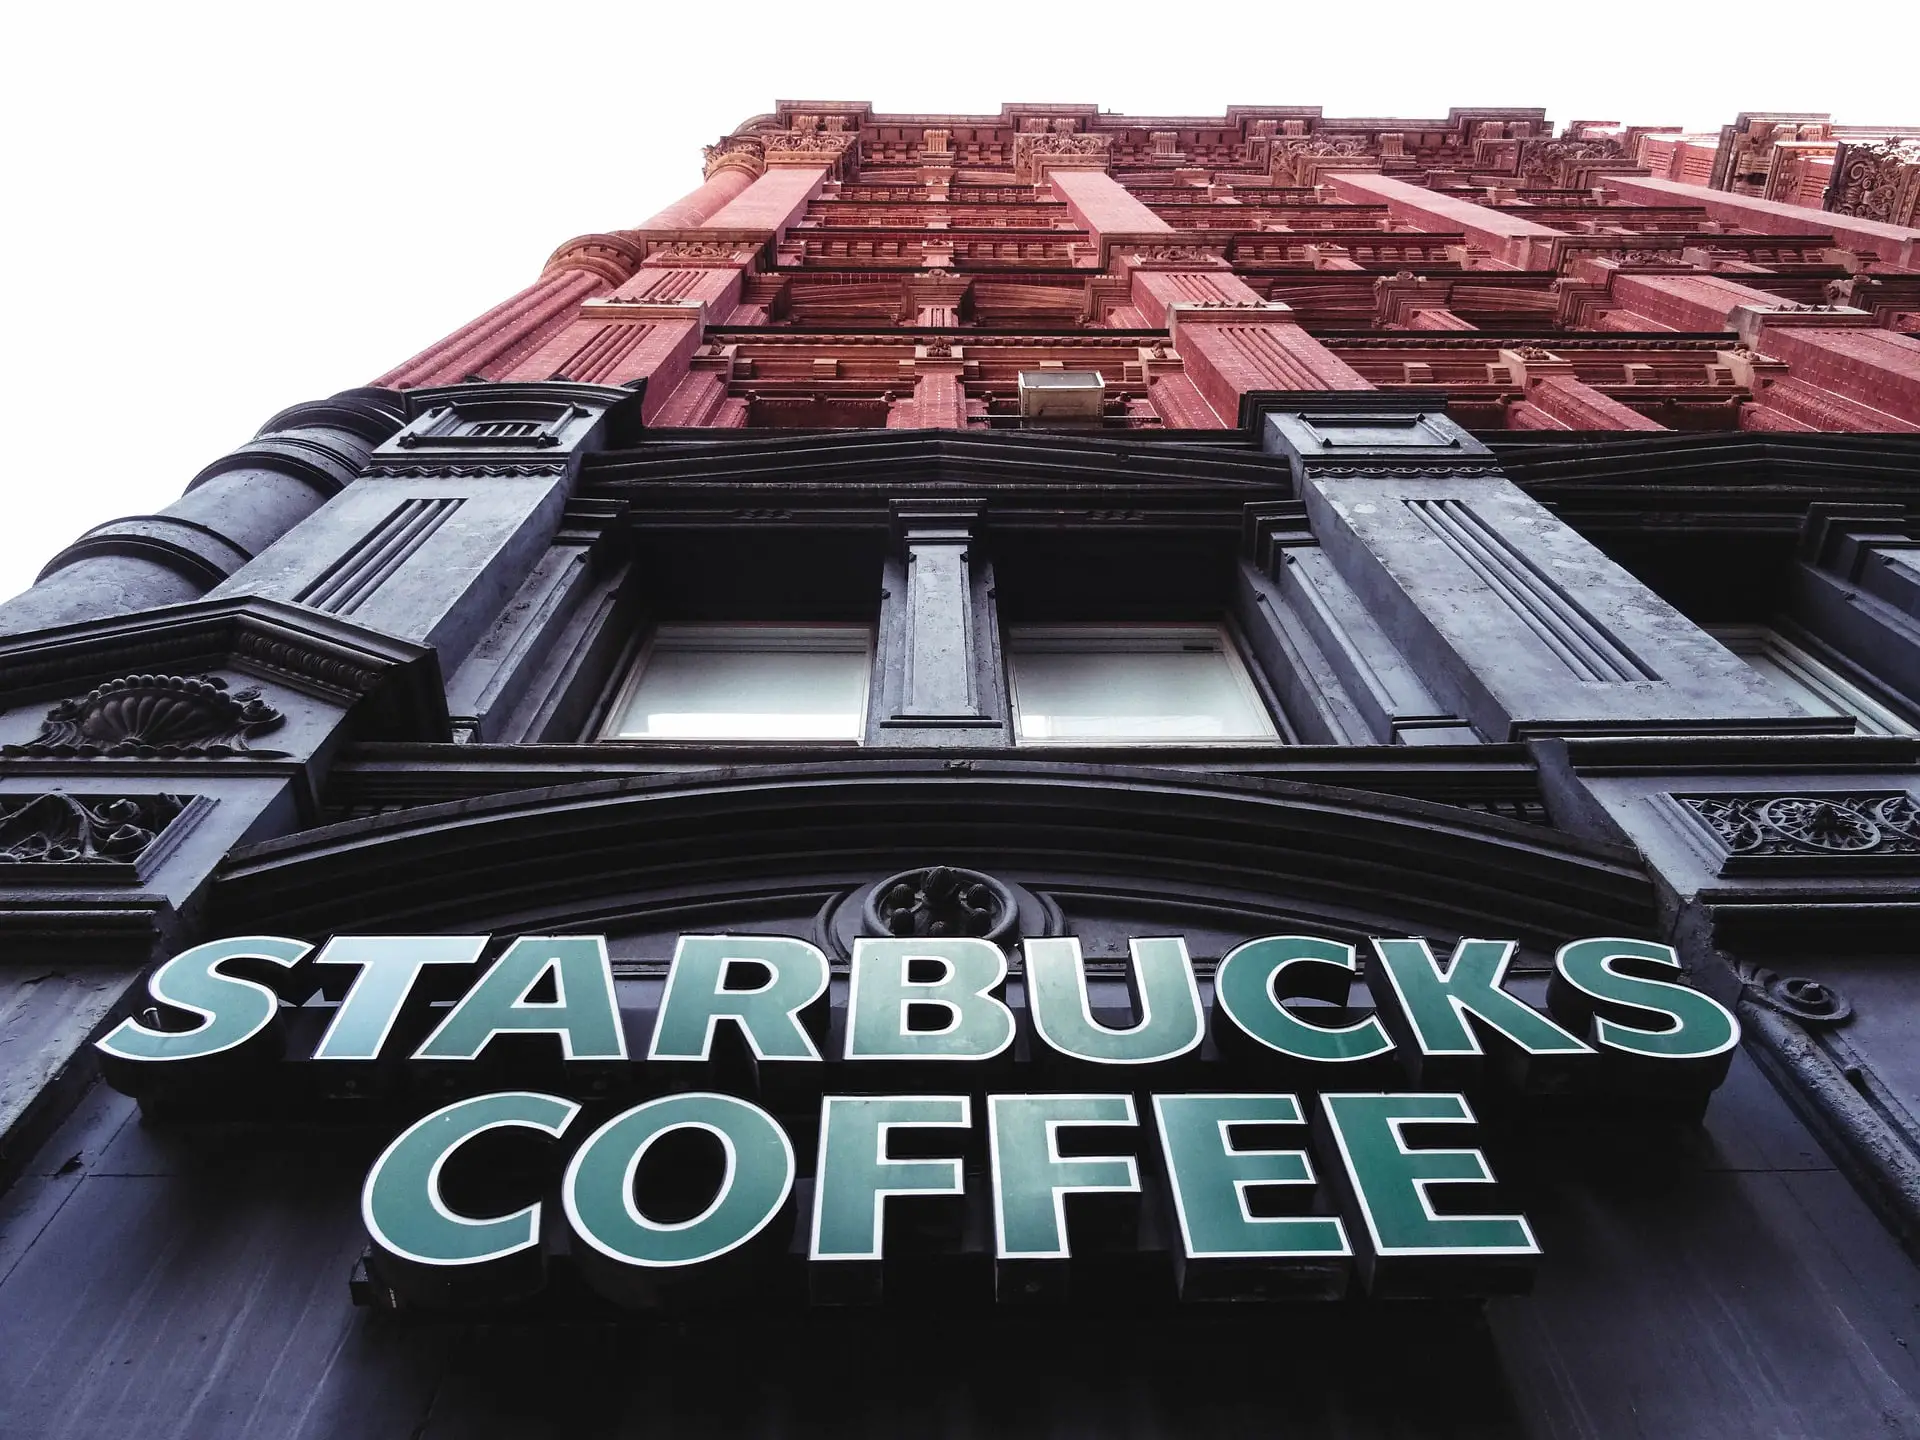 The Infrastructure is part of the secondary value chain of Starbucks